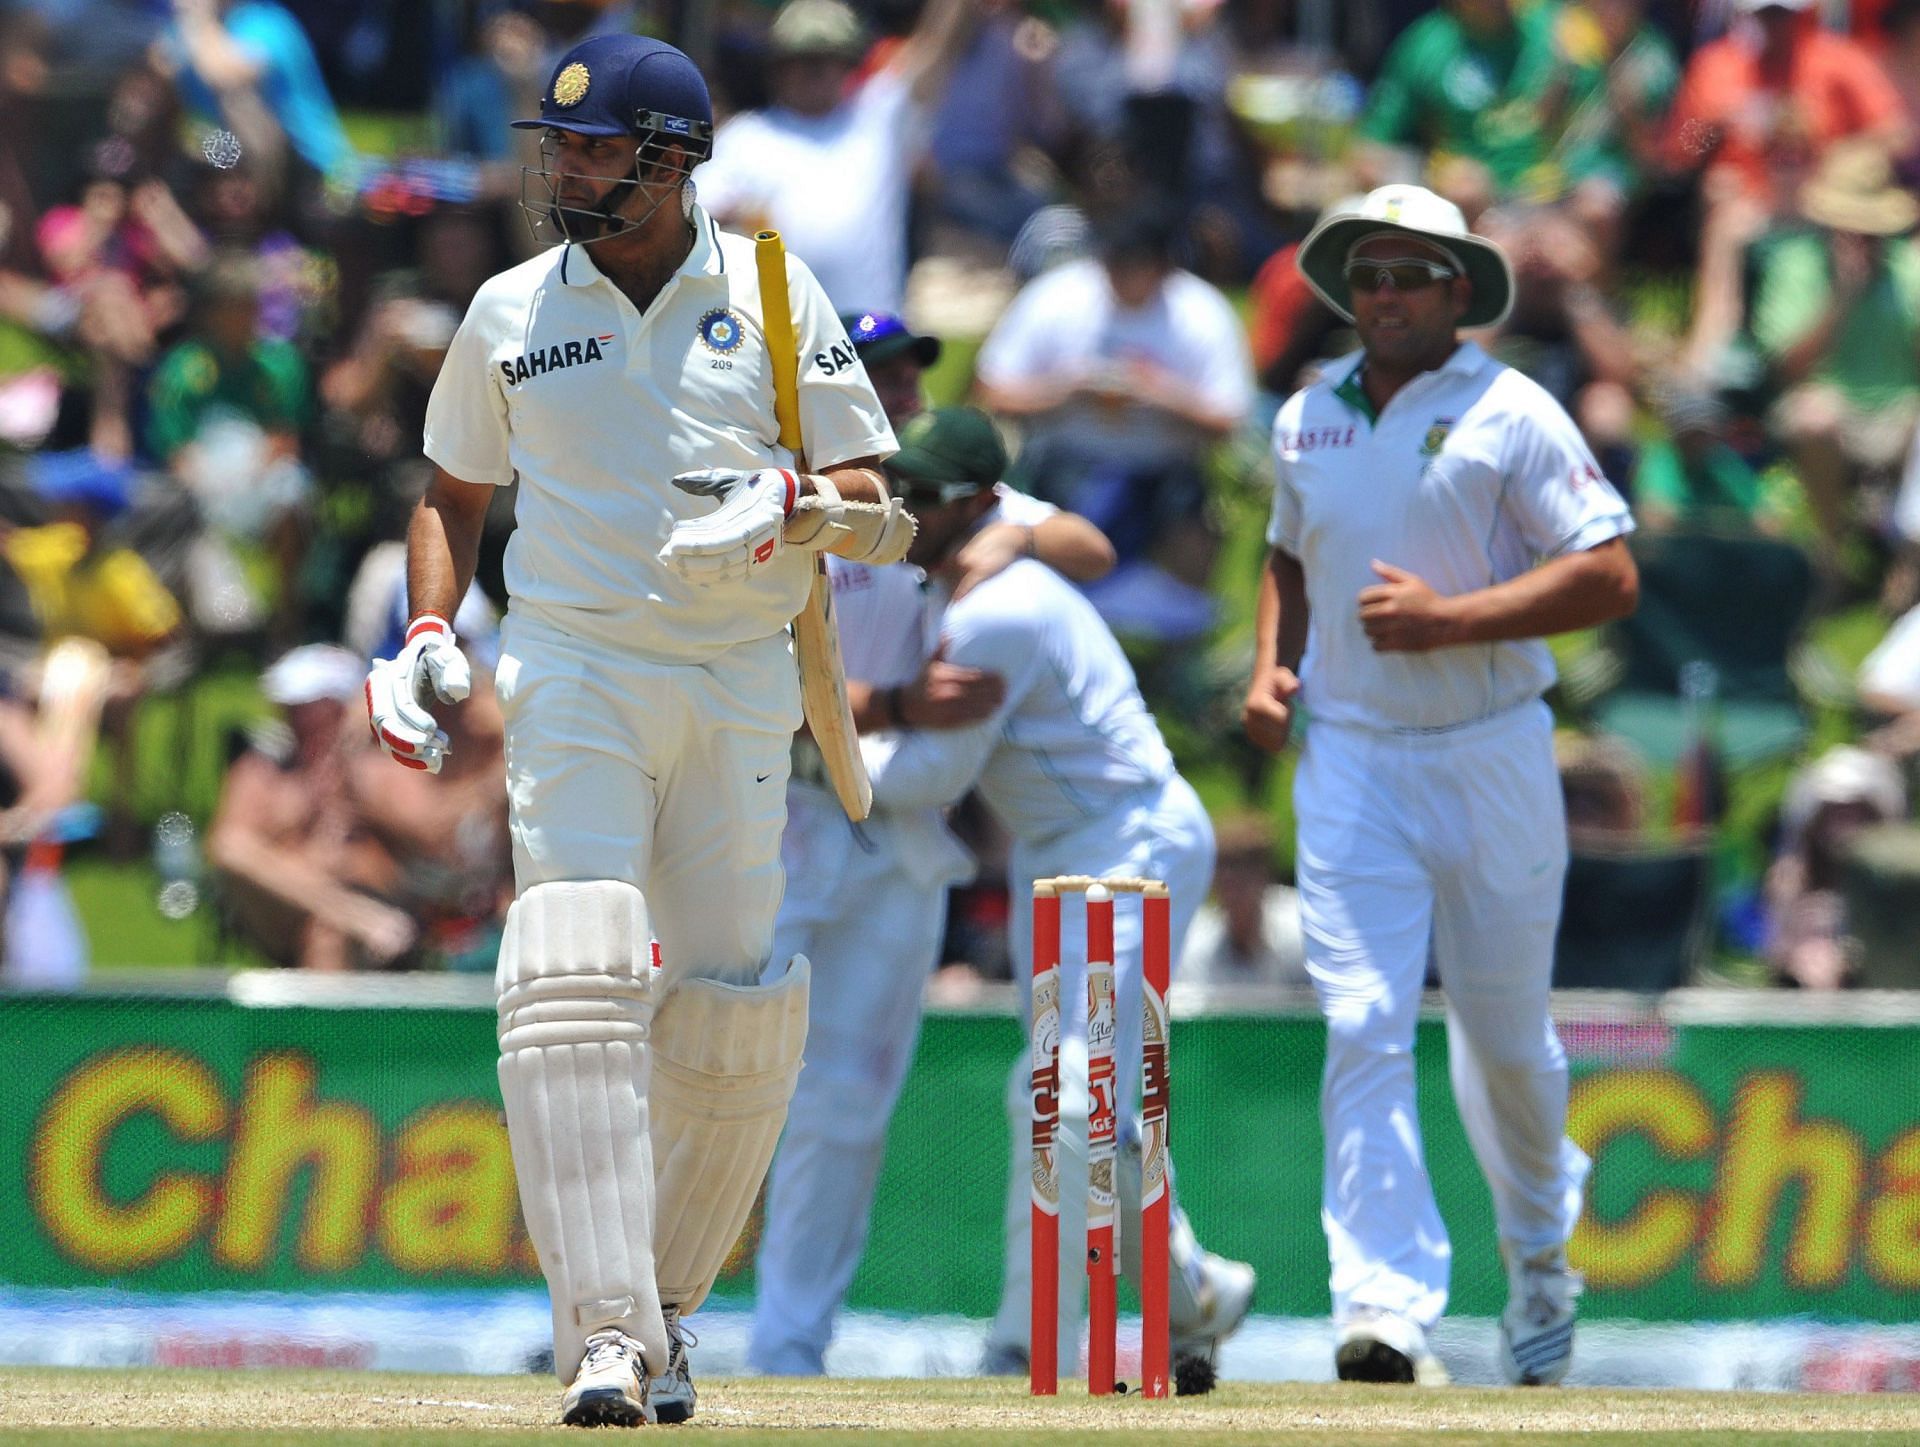 VVS Laxman walks back after being dismissed in the 2010 Centurion Test. Pic: Getty Images